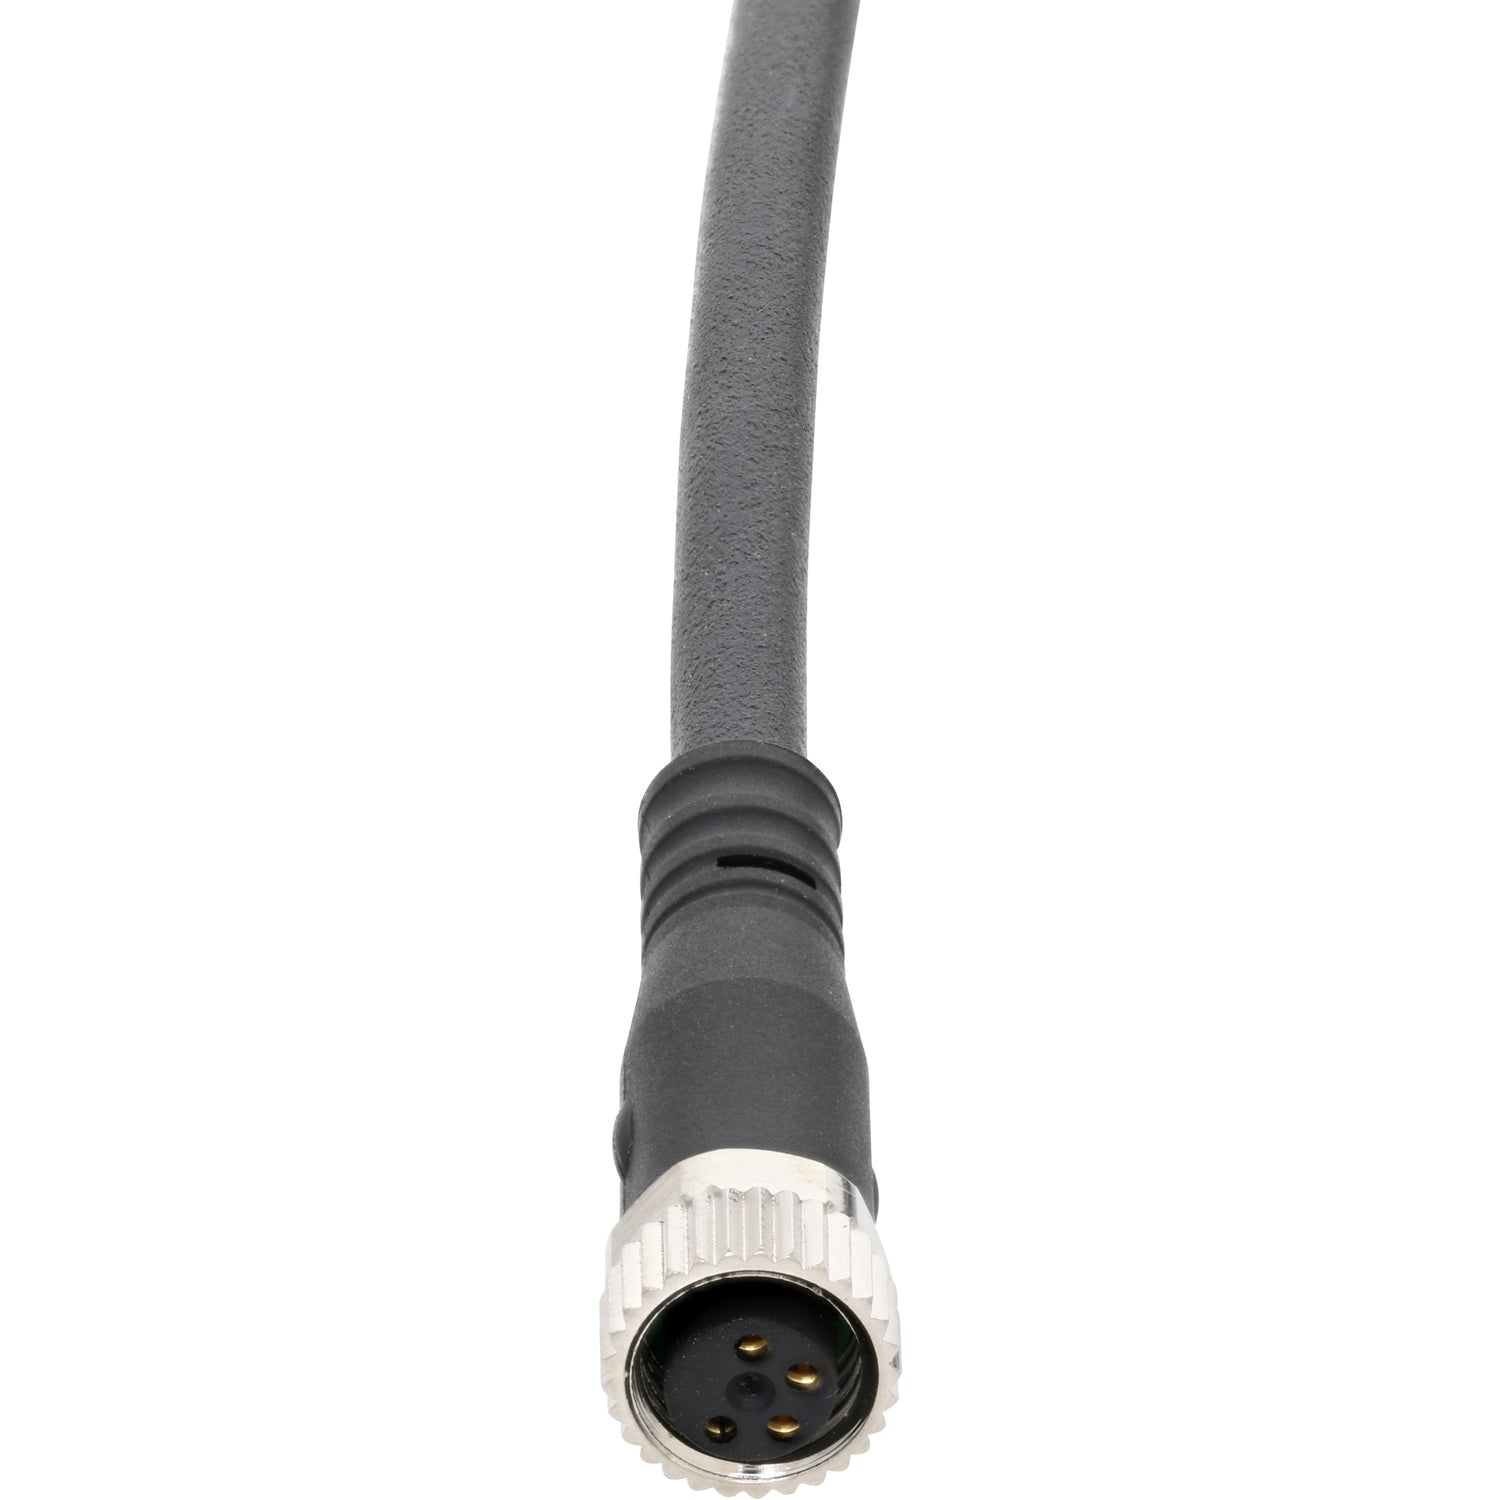 Black connecting cable with four pin nickel plated female connector on white background. 